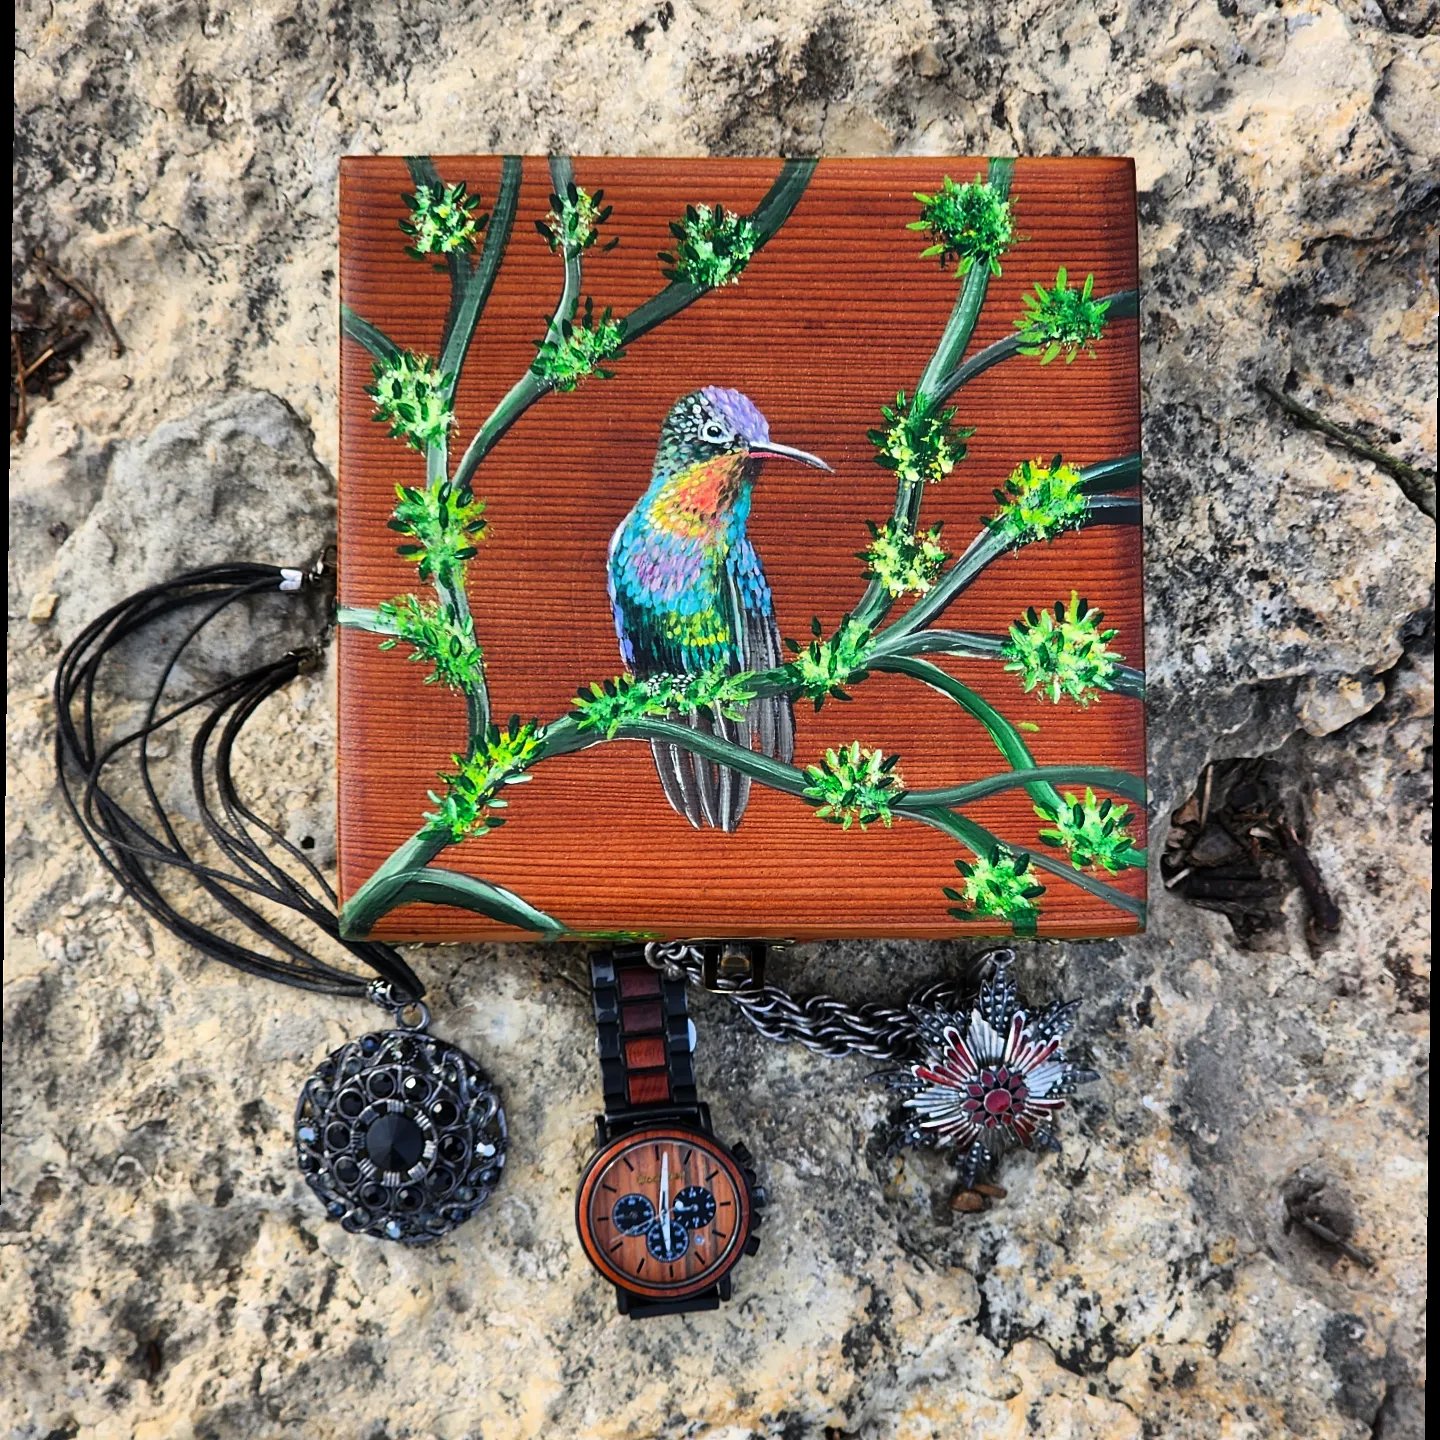 Antique wooden trinket/jewelry box, handpainted with acrylic paint inspired by nature and the beauty and colorful harmony of the hummingbirds. Metal feet and lock was added to the box to make it look more professional and complete as a work of art. It includes felt inside to insert rings in it.